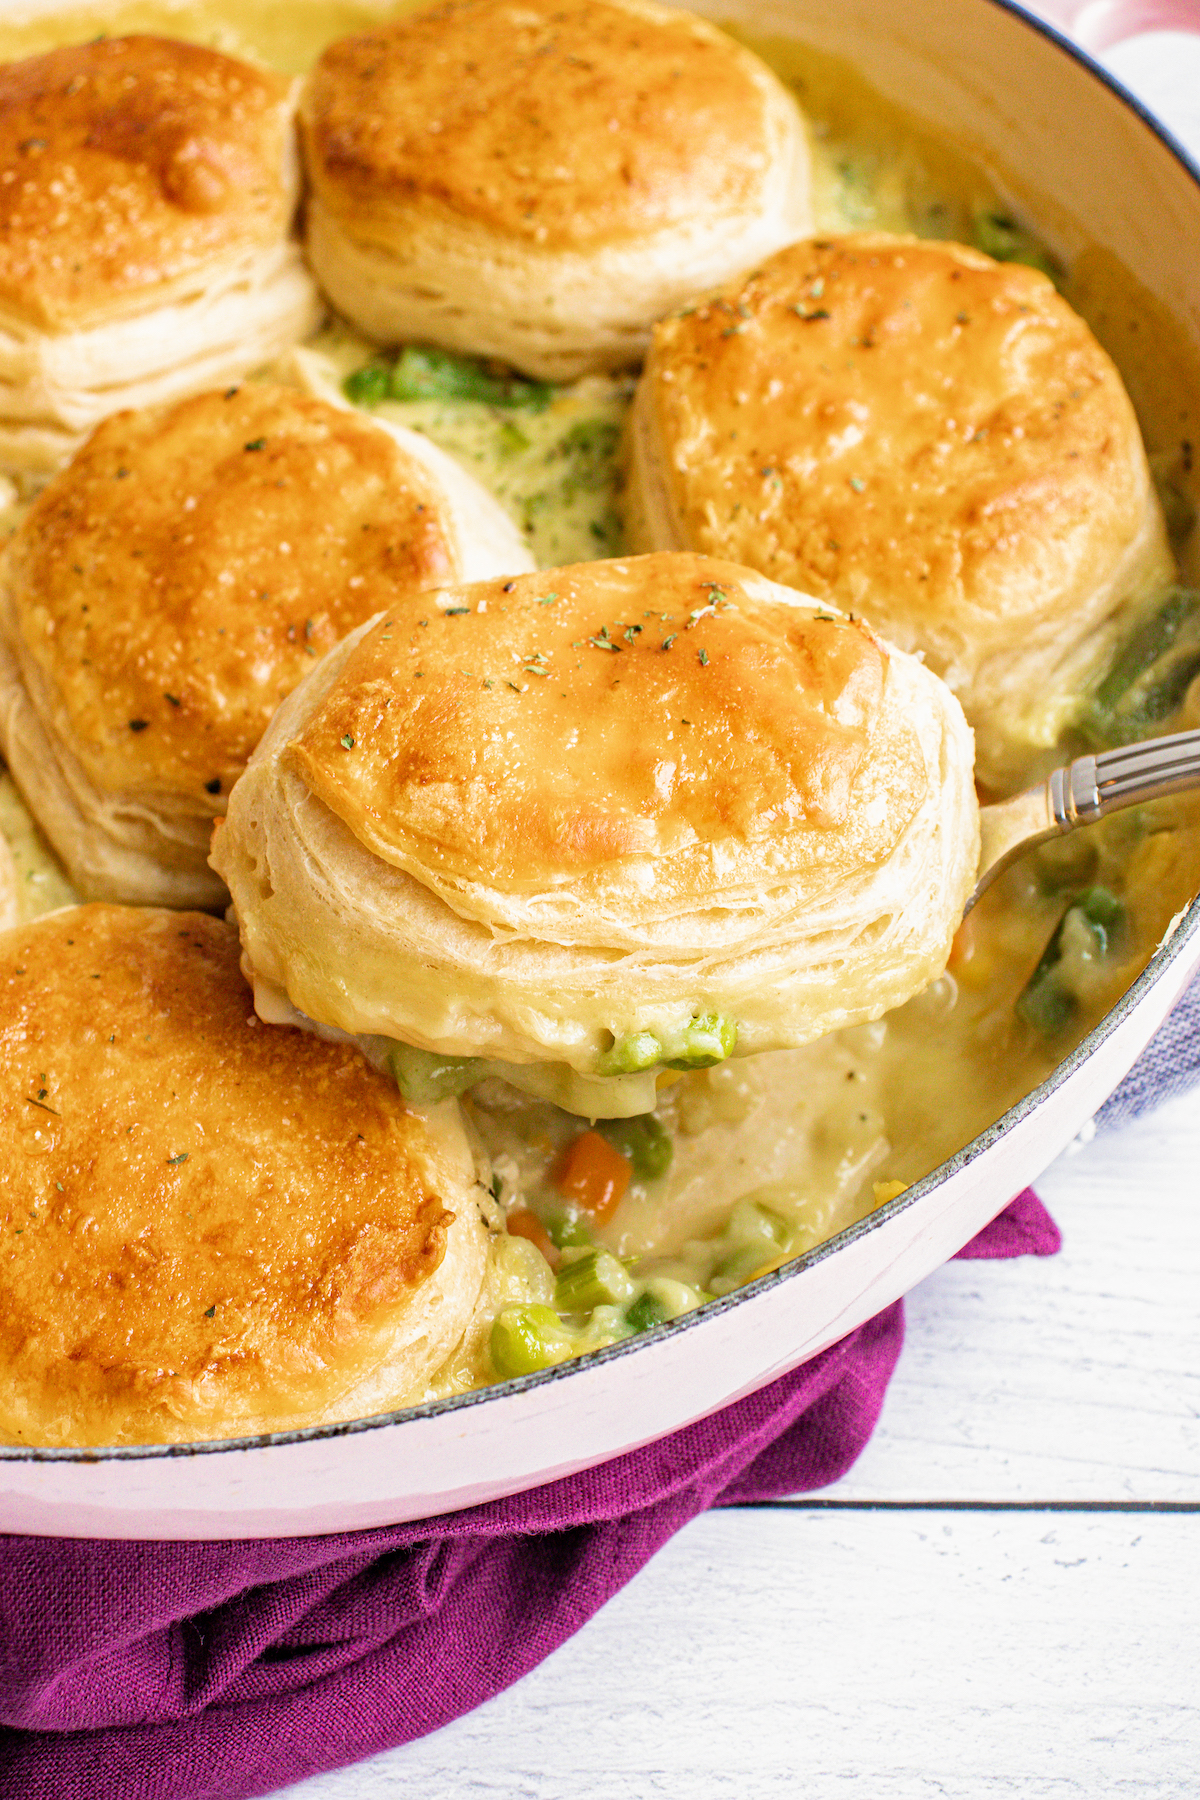 Chicken pot pie with biscuits with a serving spoon.